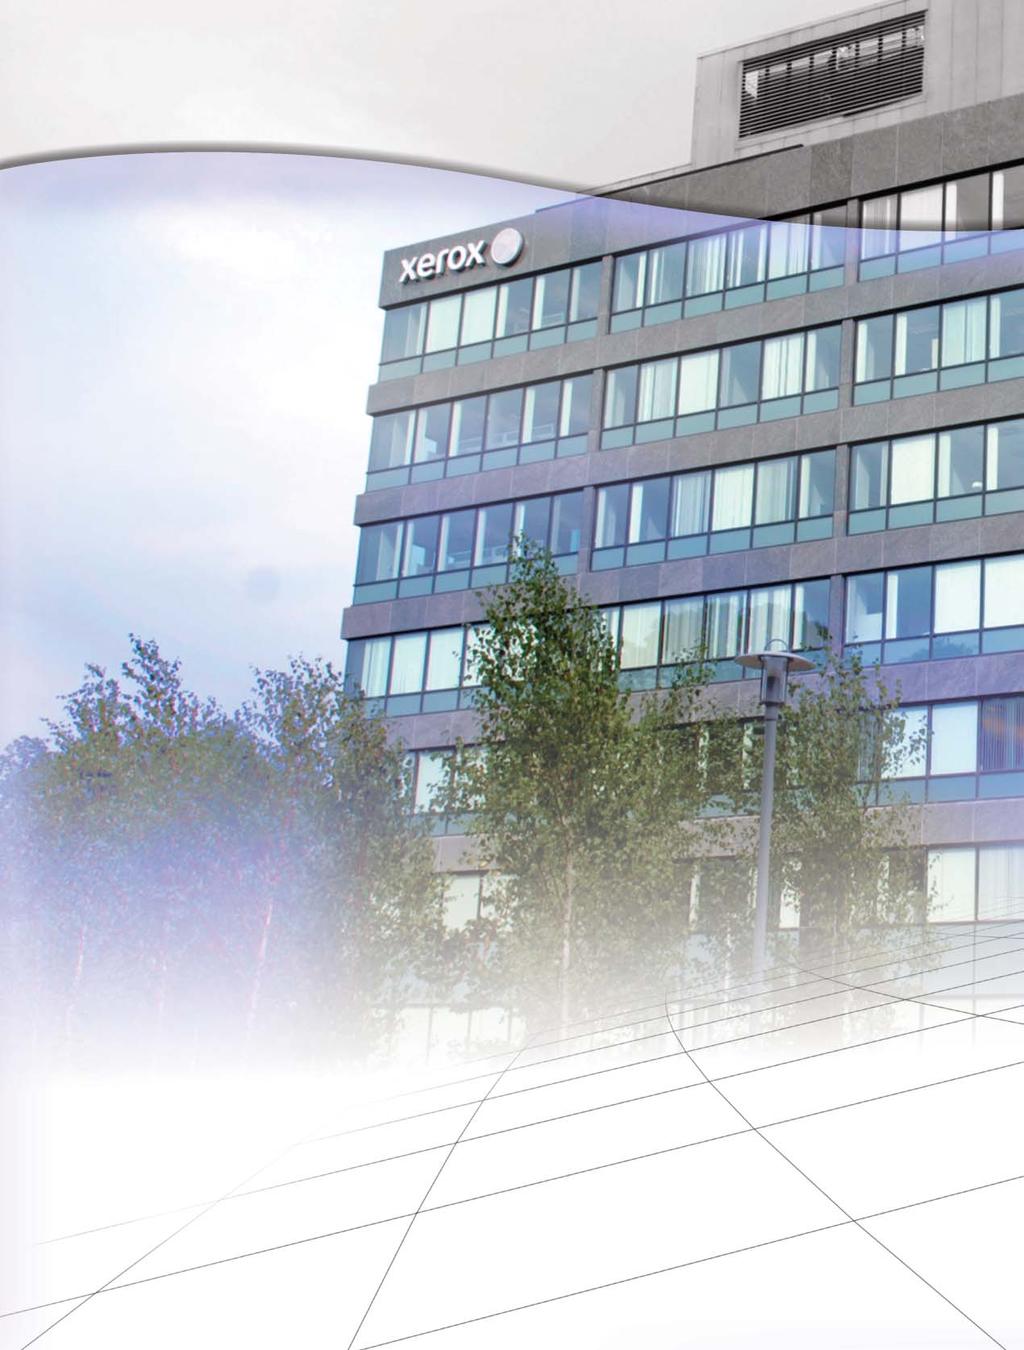 Established in 1965, Xerox Manufacturing is based in Venray, Netherlands.